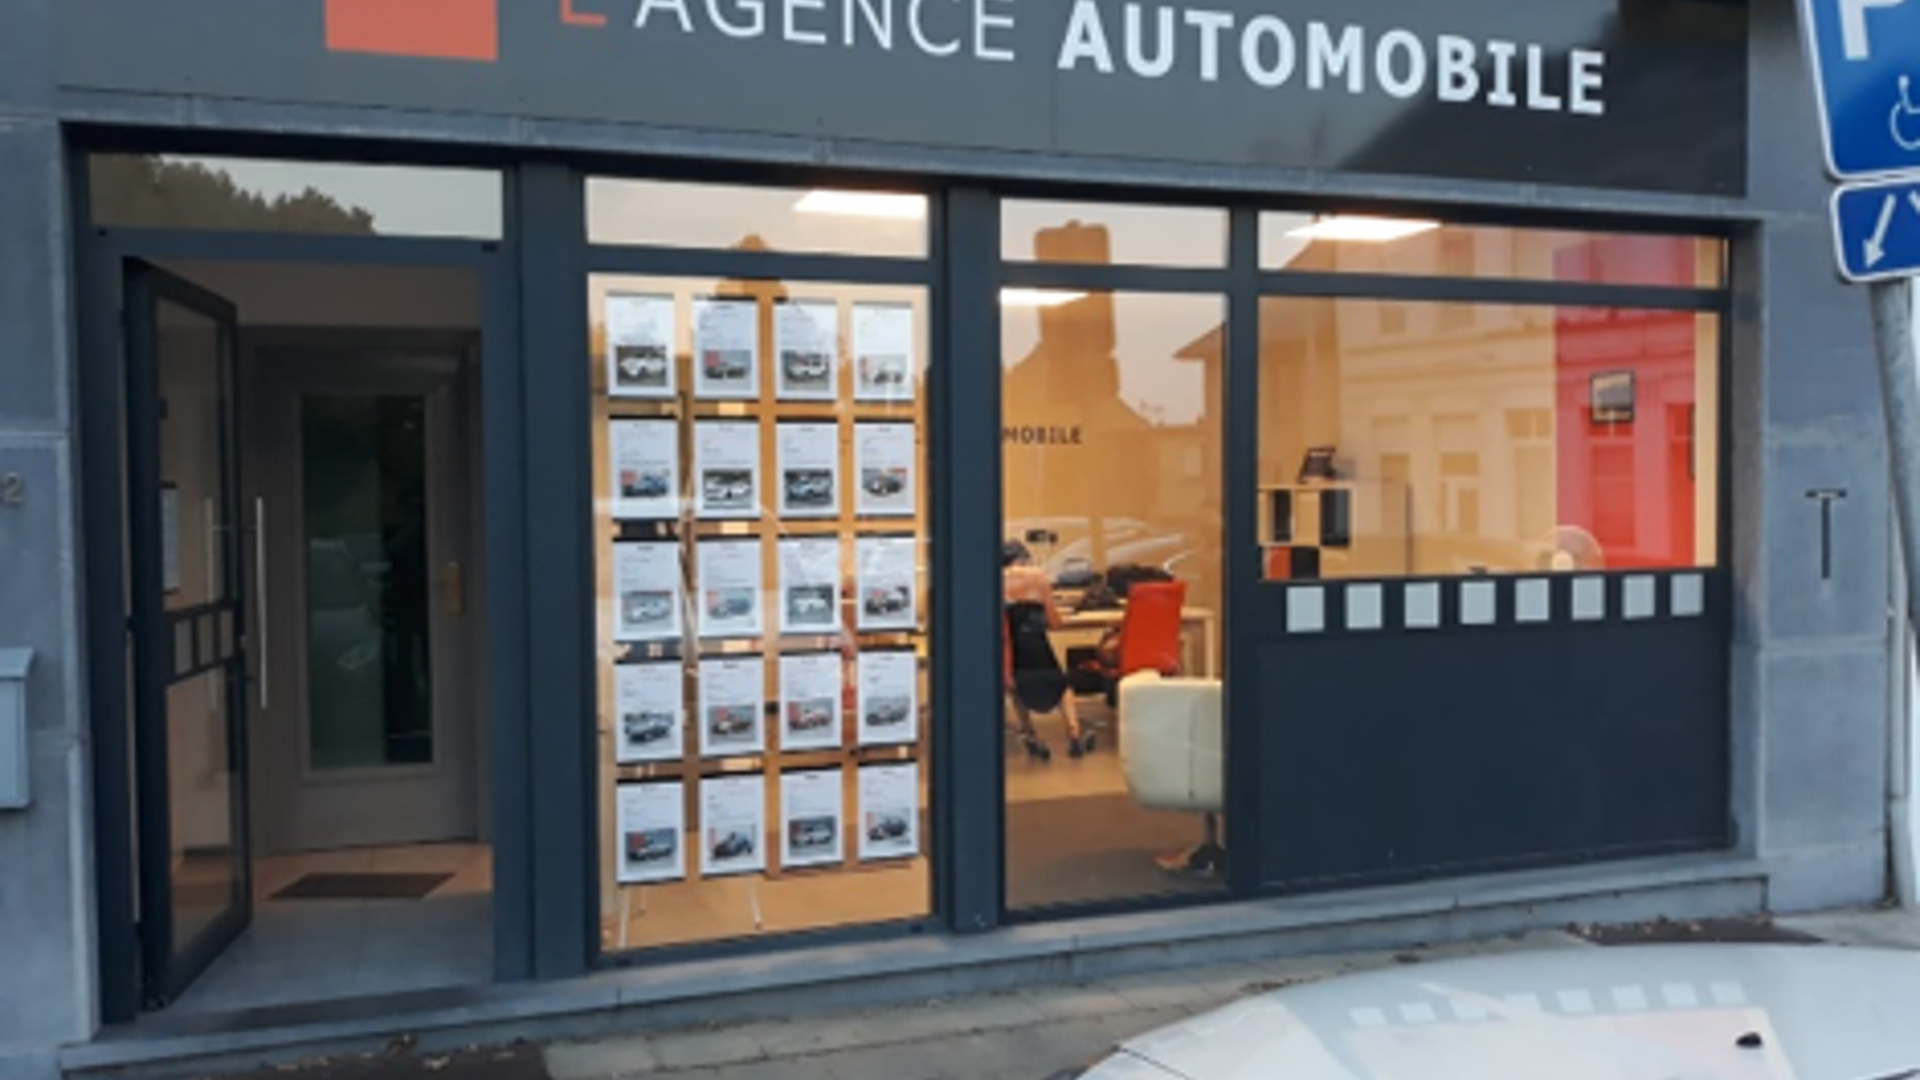 agence automobile 3.png